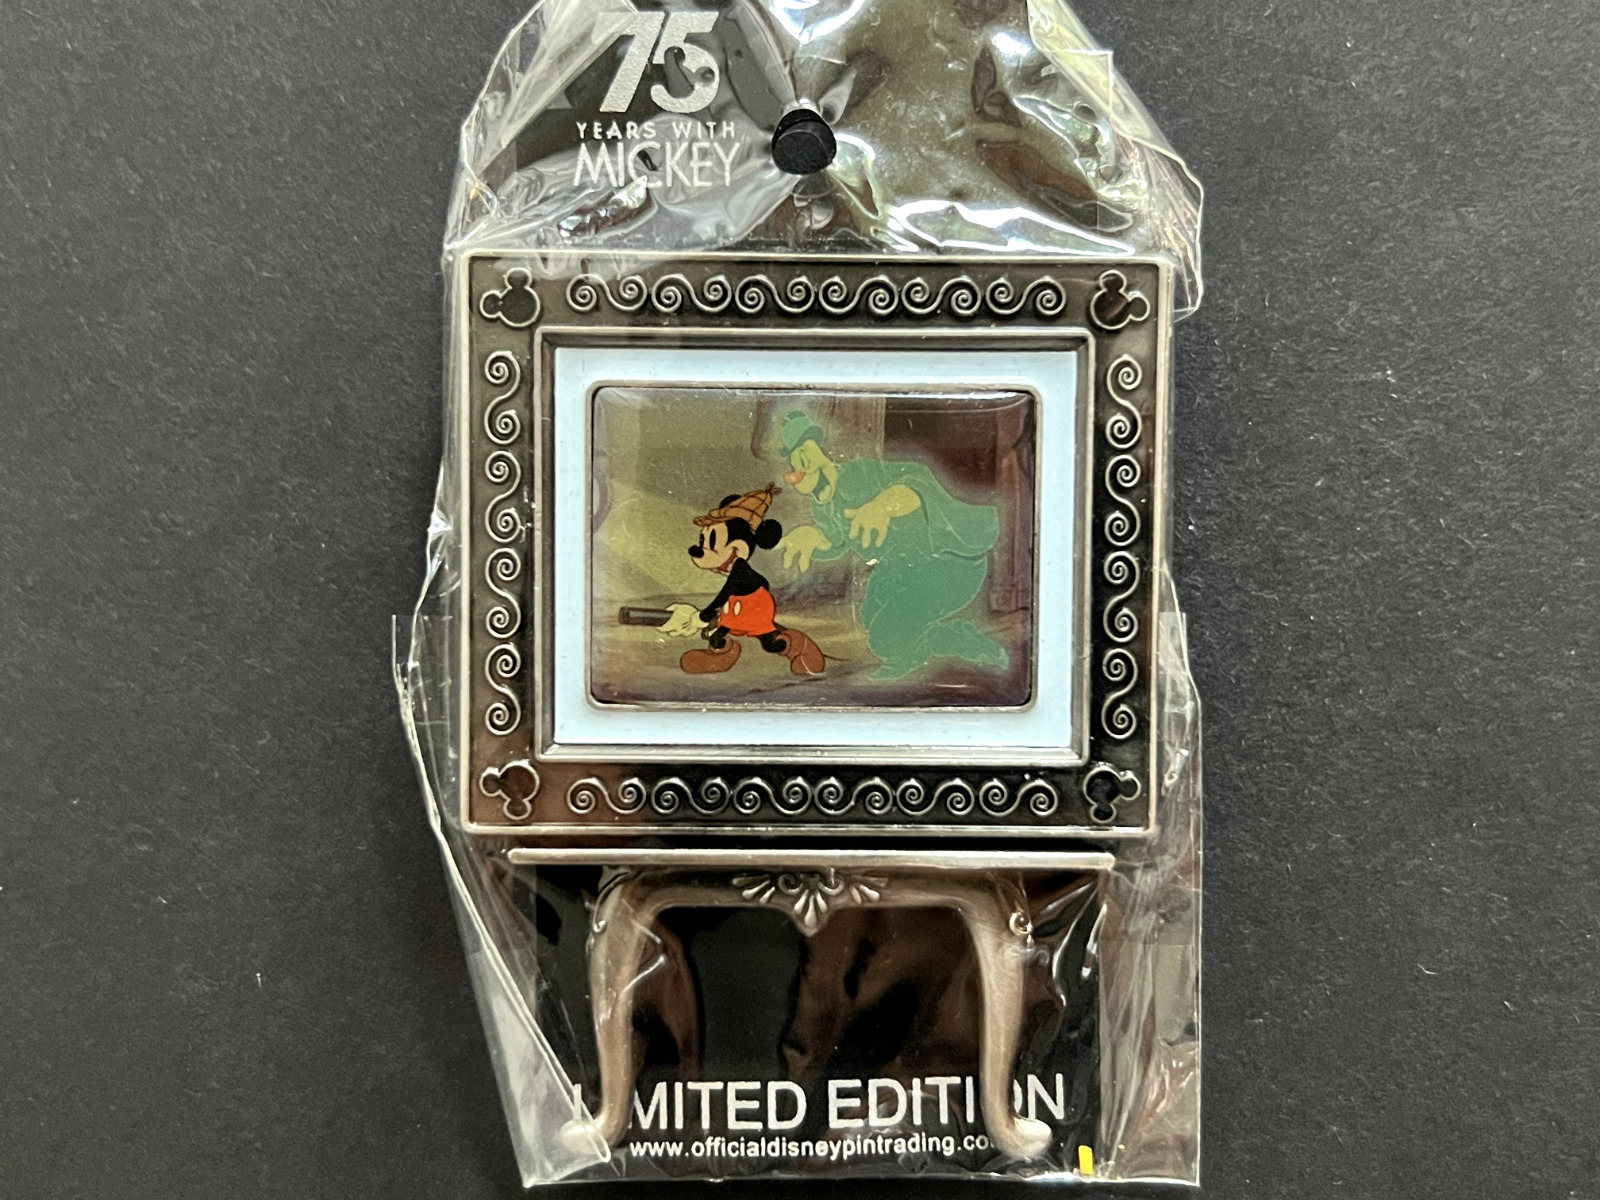 WDW Lonesome Ghosts Mickey's 75th Anniversary POM #6 - Easel LE Disney Pin 22344